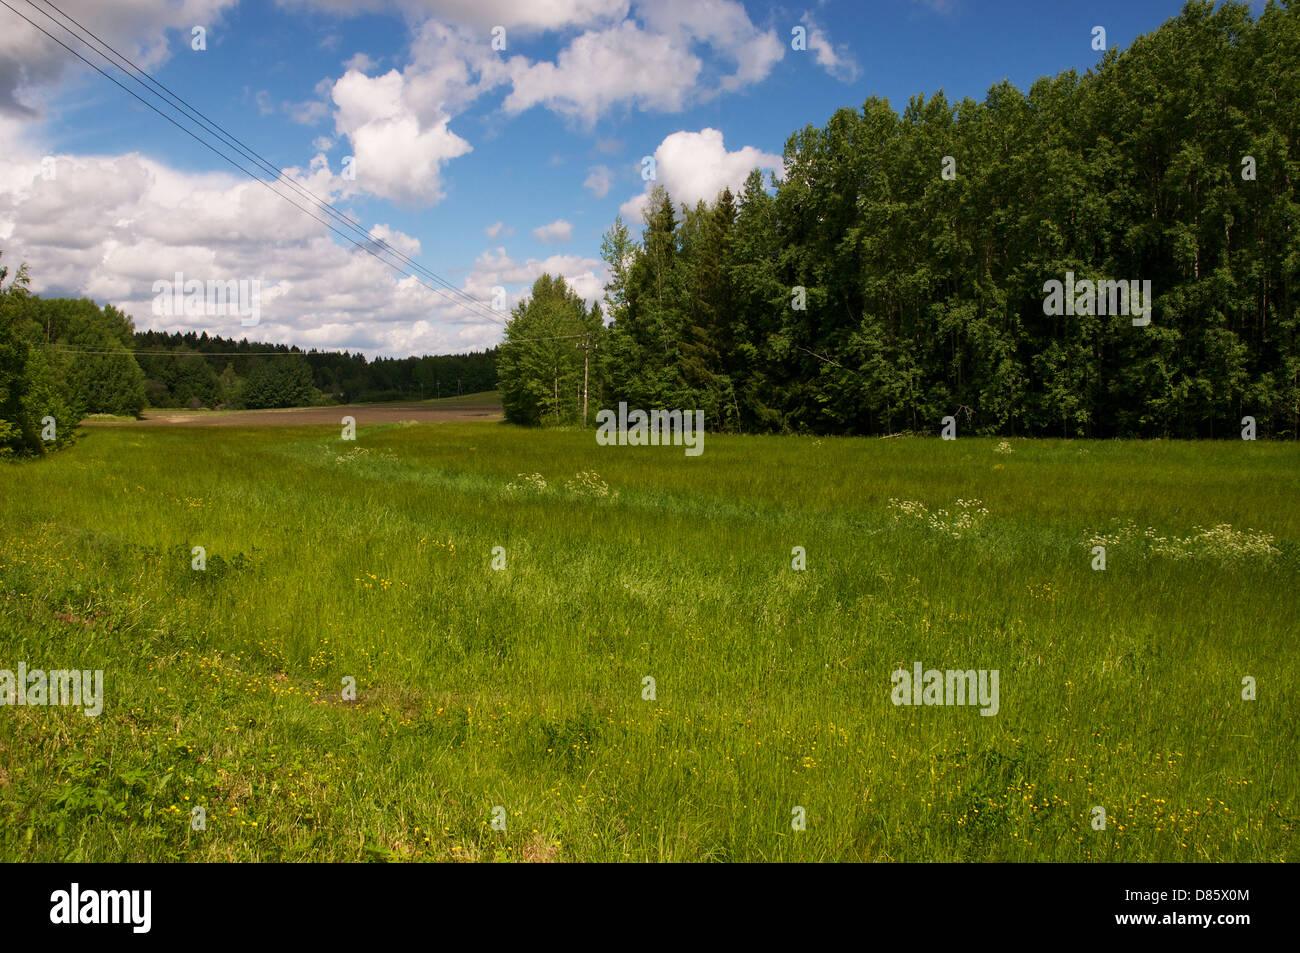 Landscape in Kirkkonummi, Finland with field, forest and clouds. Stock Photo